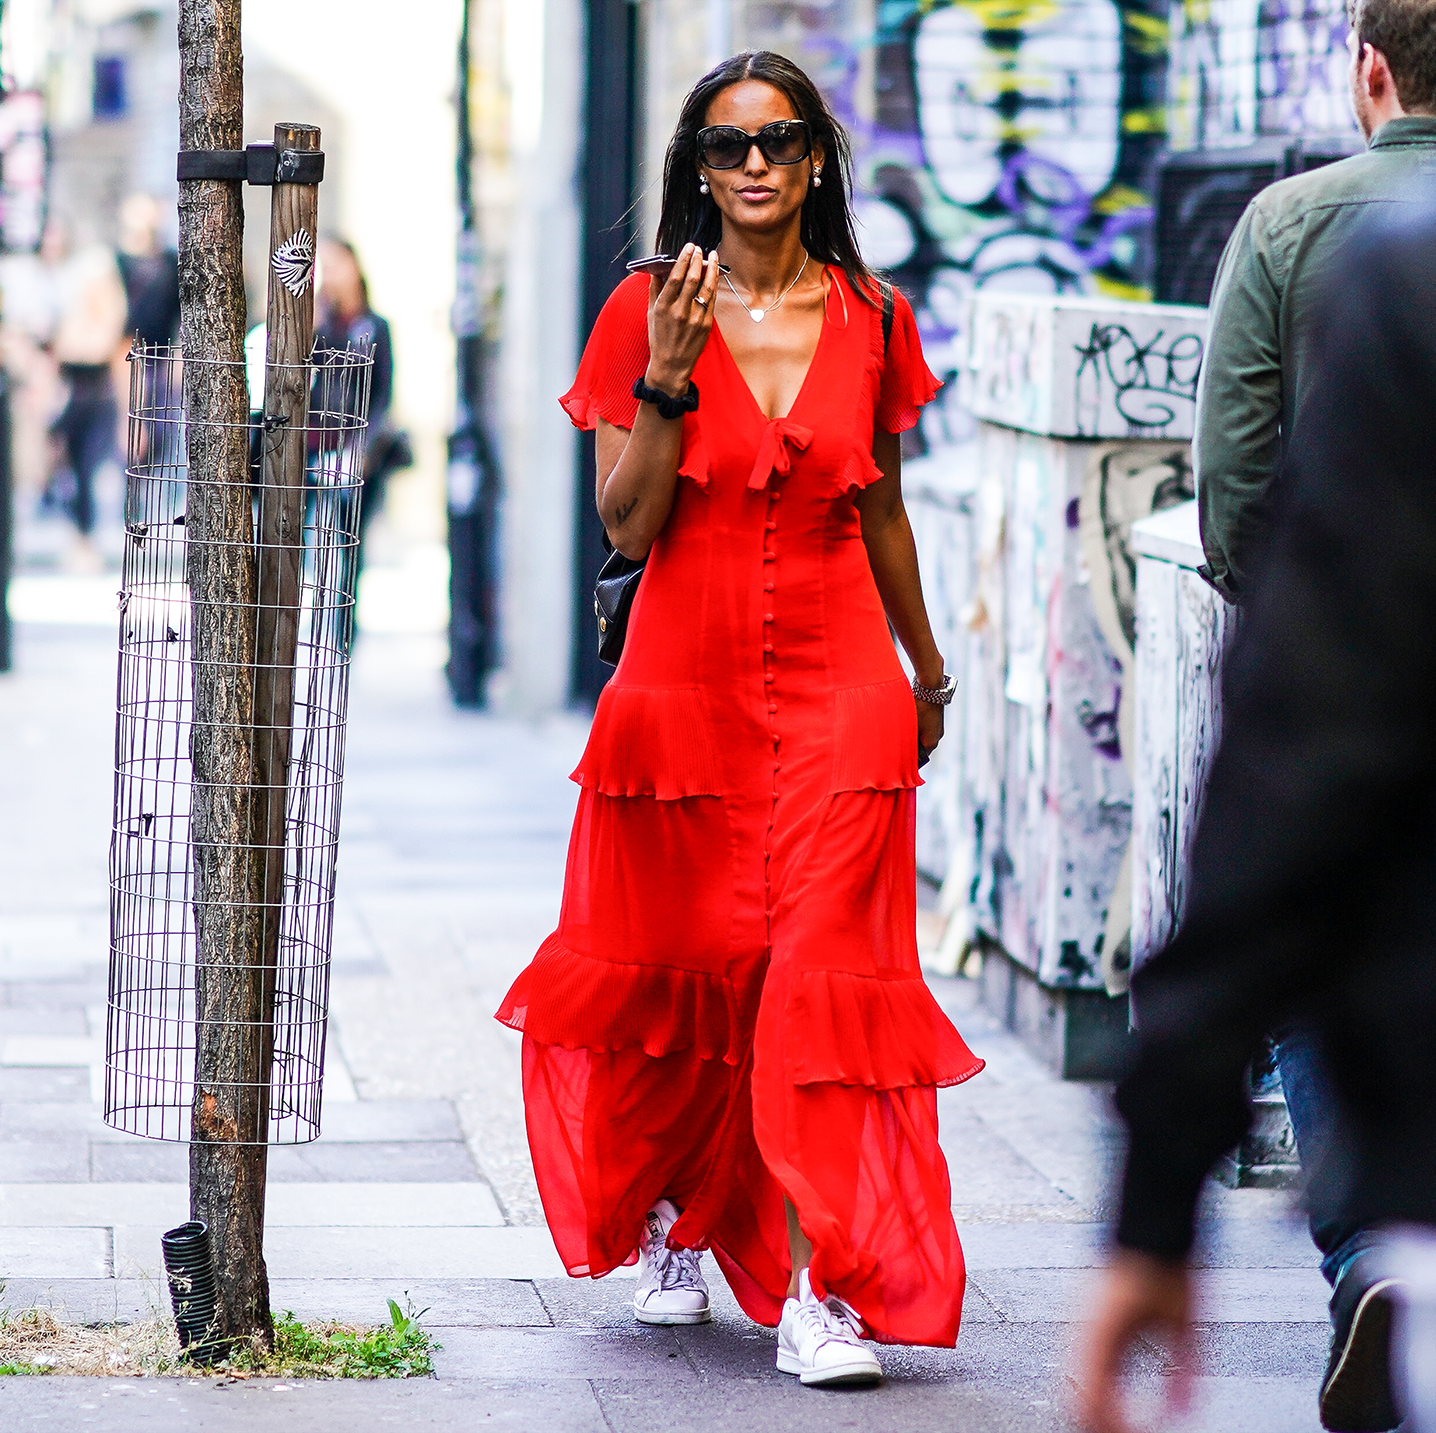 Found: Top-Rated Dresses on Amazon That Are Actually Worth the Buy